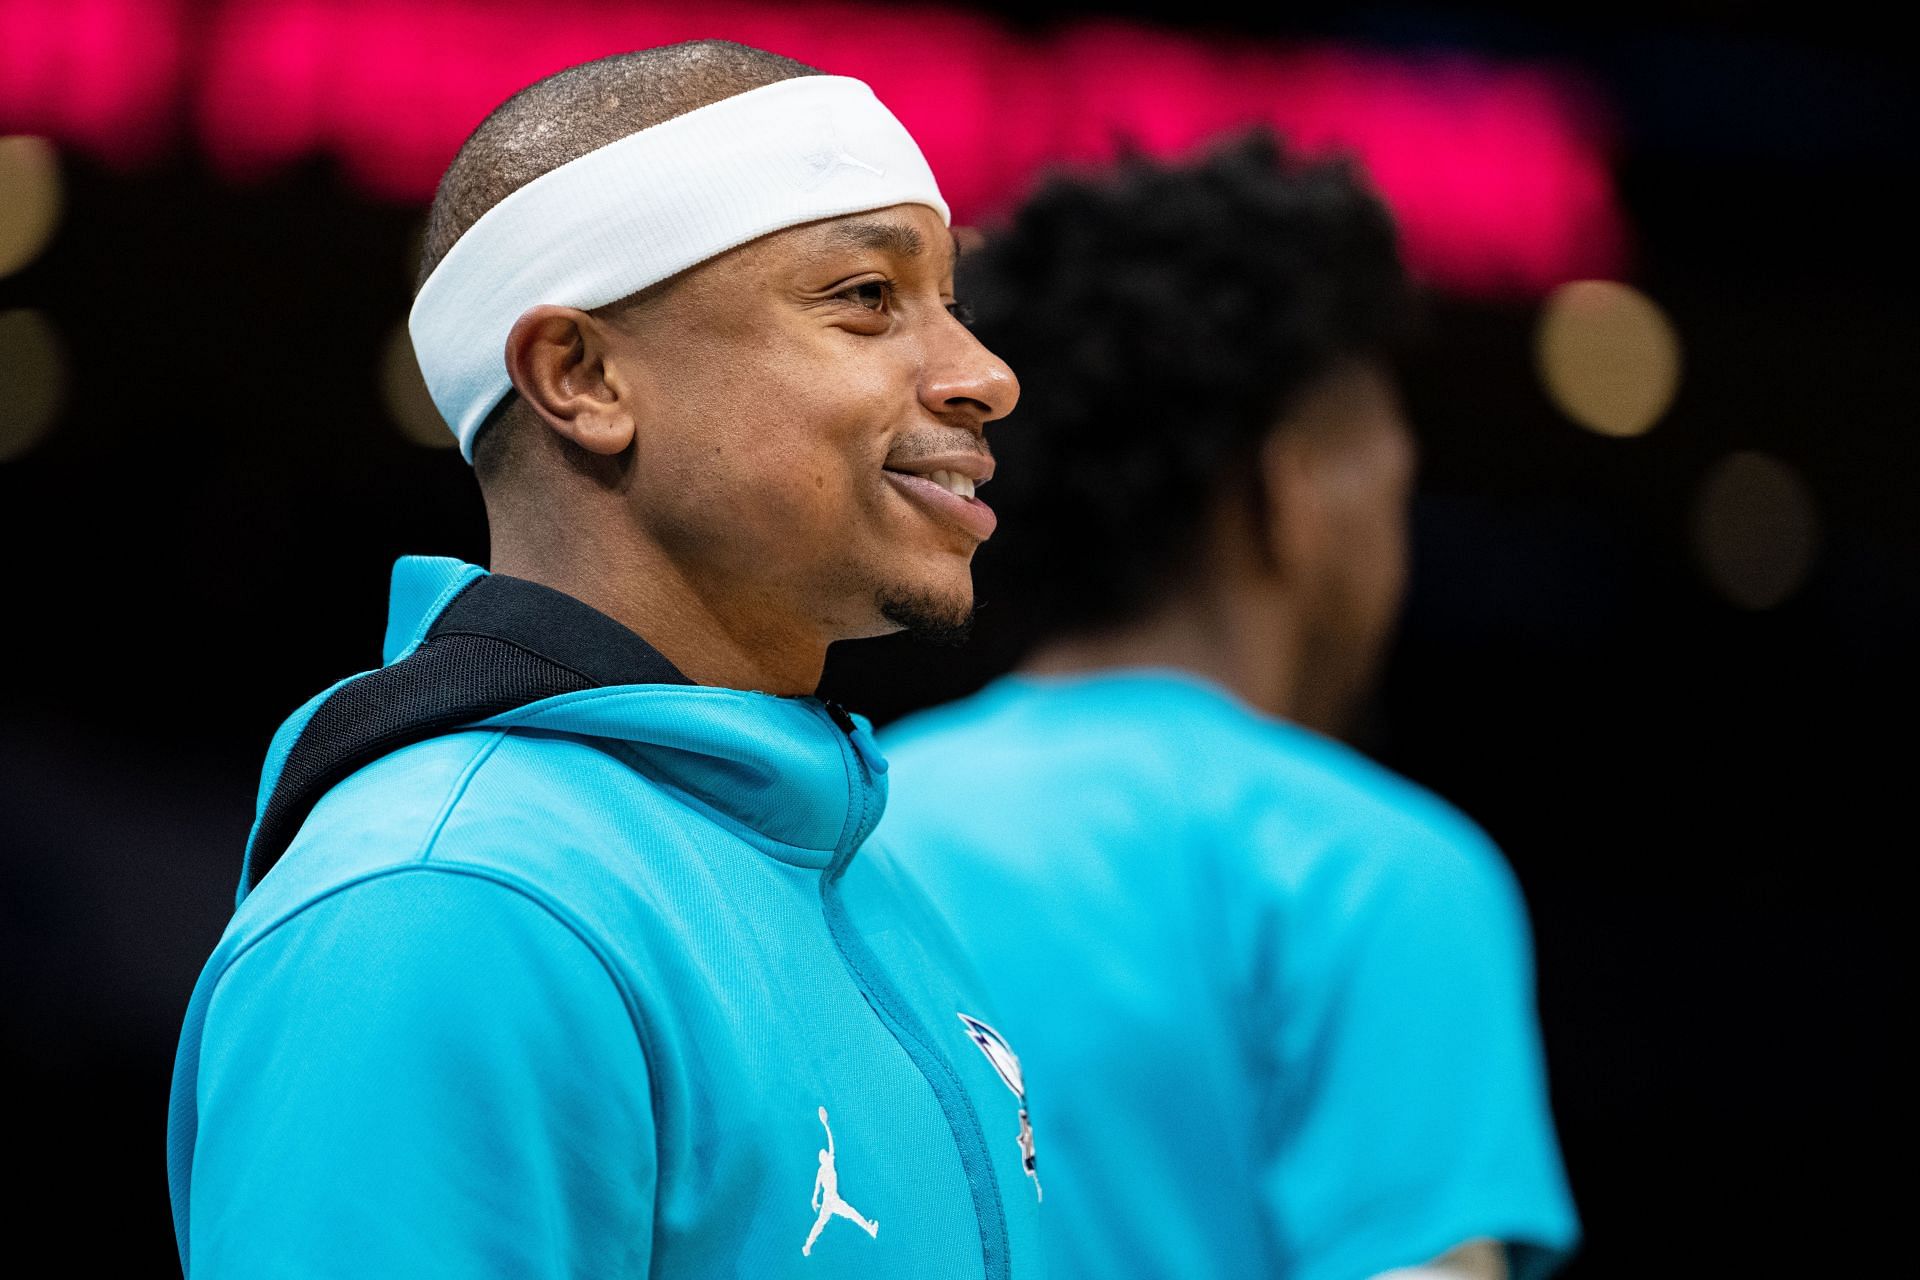 Isaiah Thomas during his time with the Charlotte Hornets